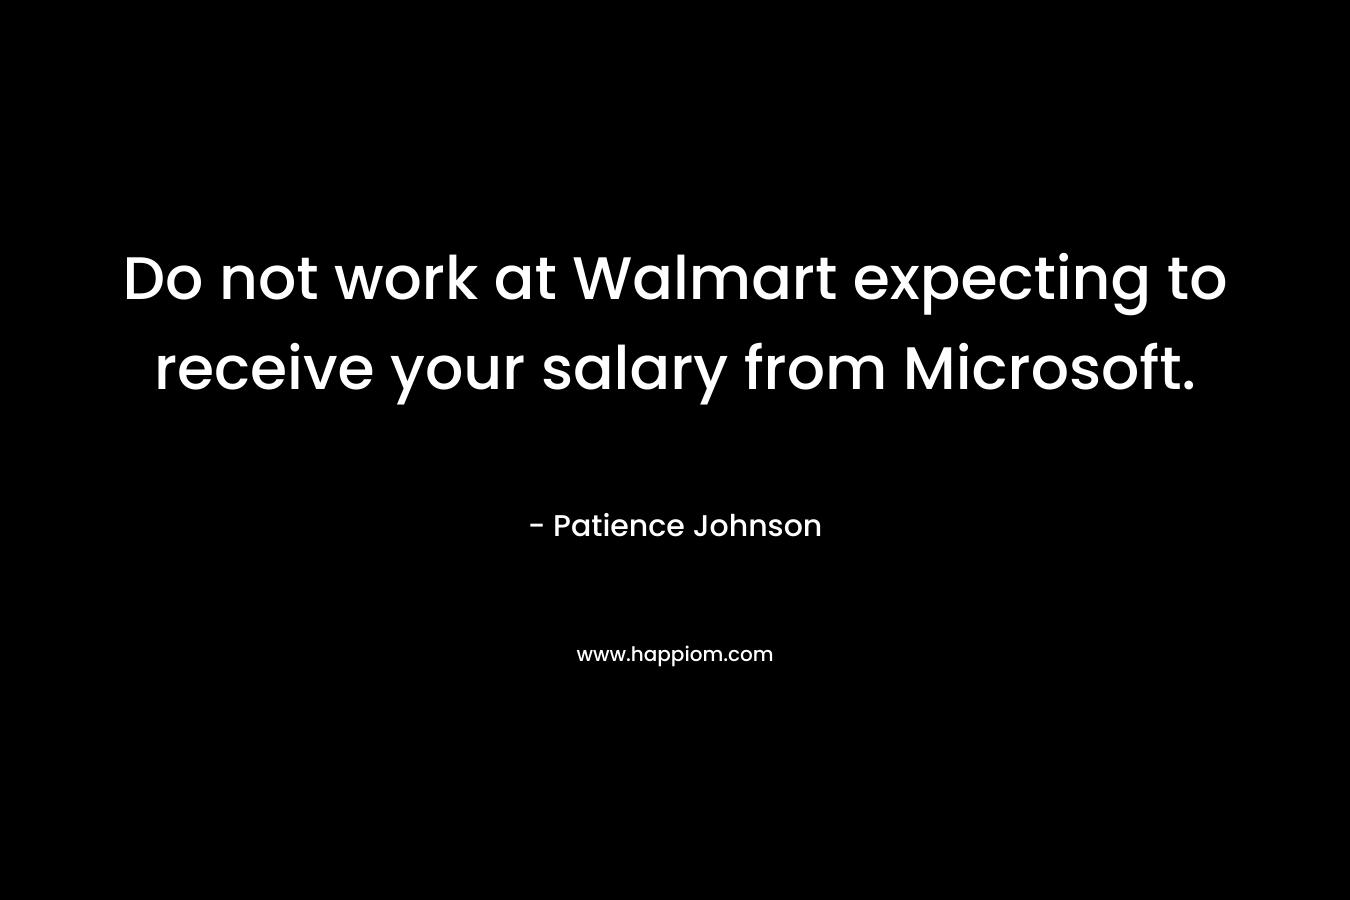 Do not work at Walmart expecting to receive your salary from Microsoft.